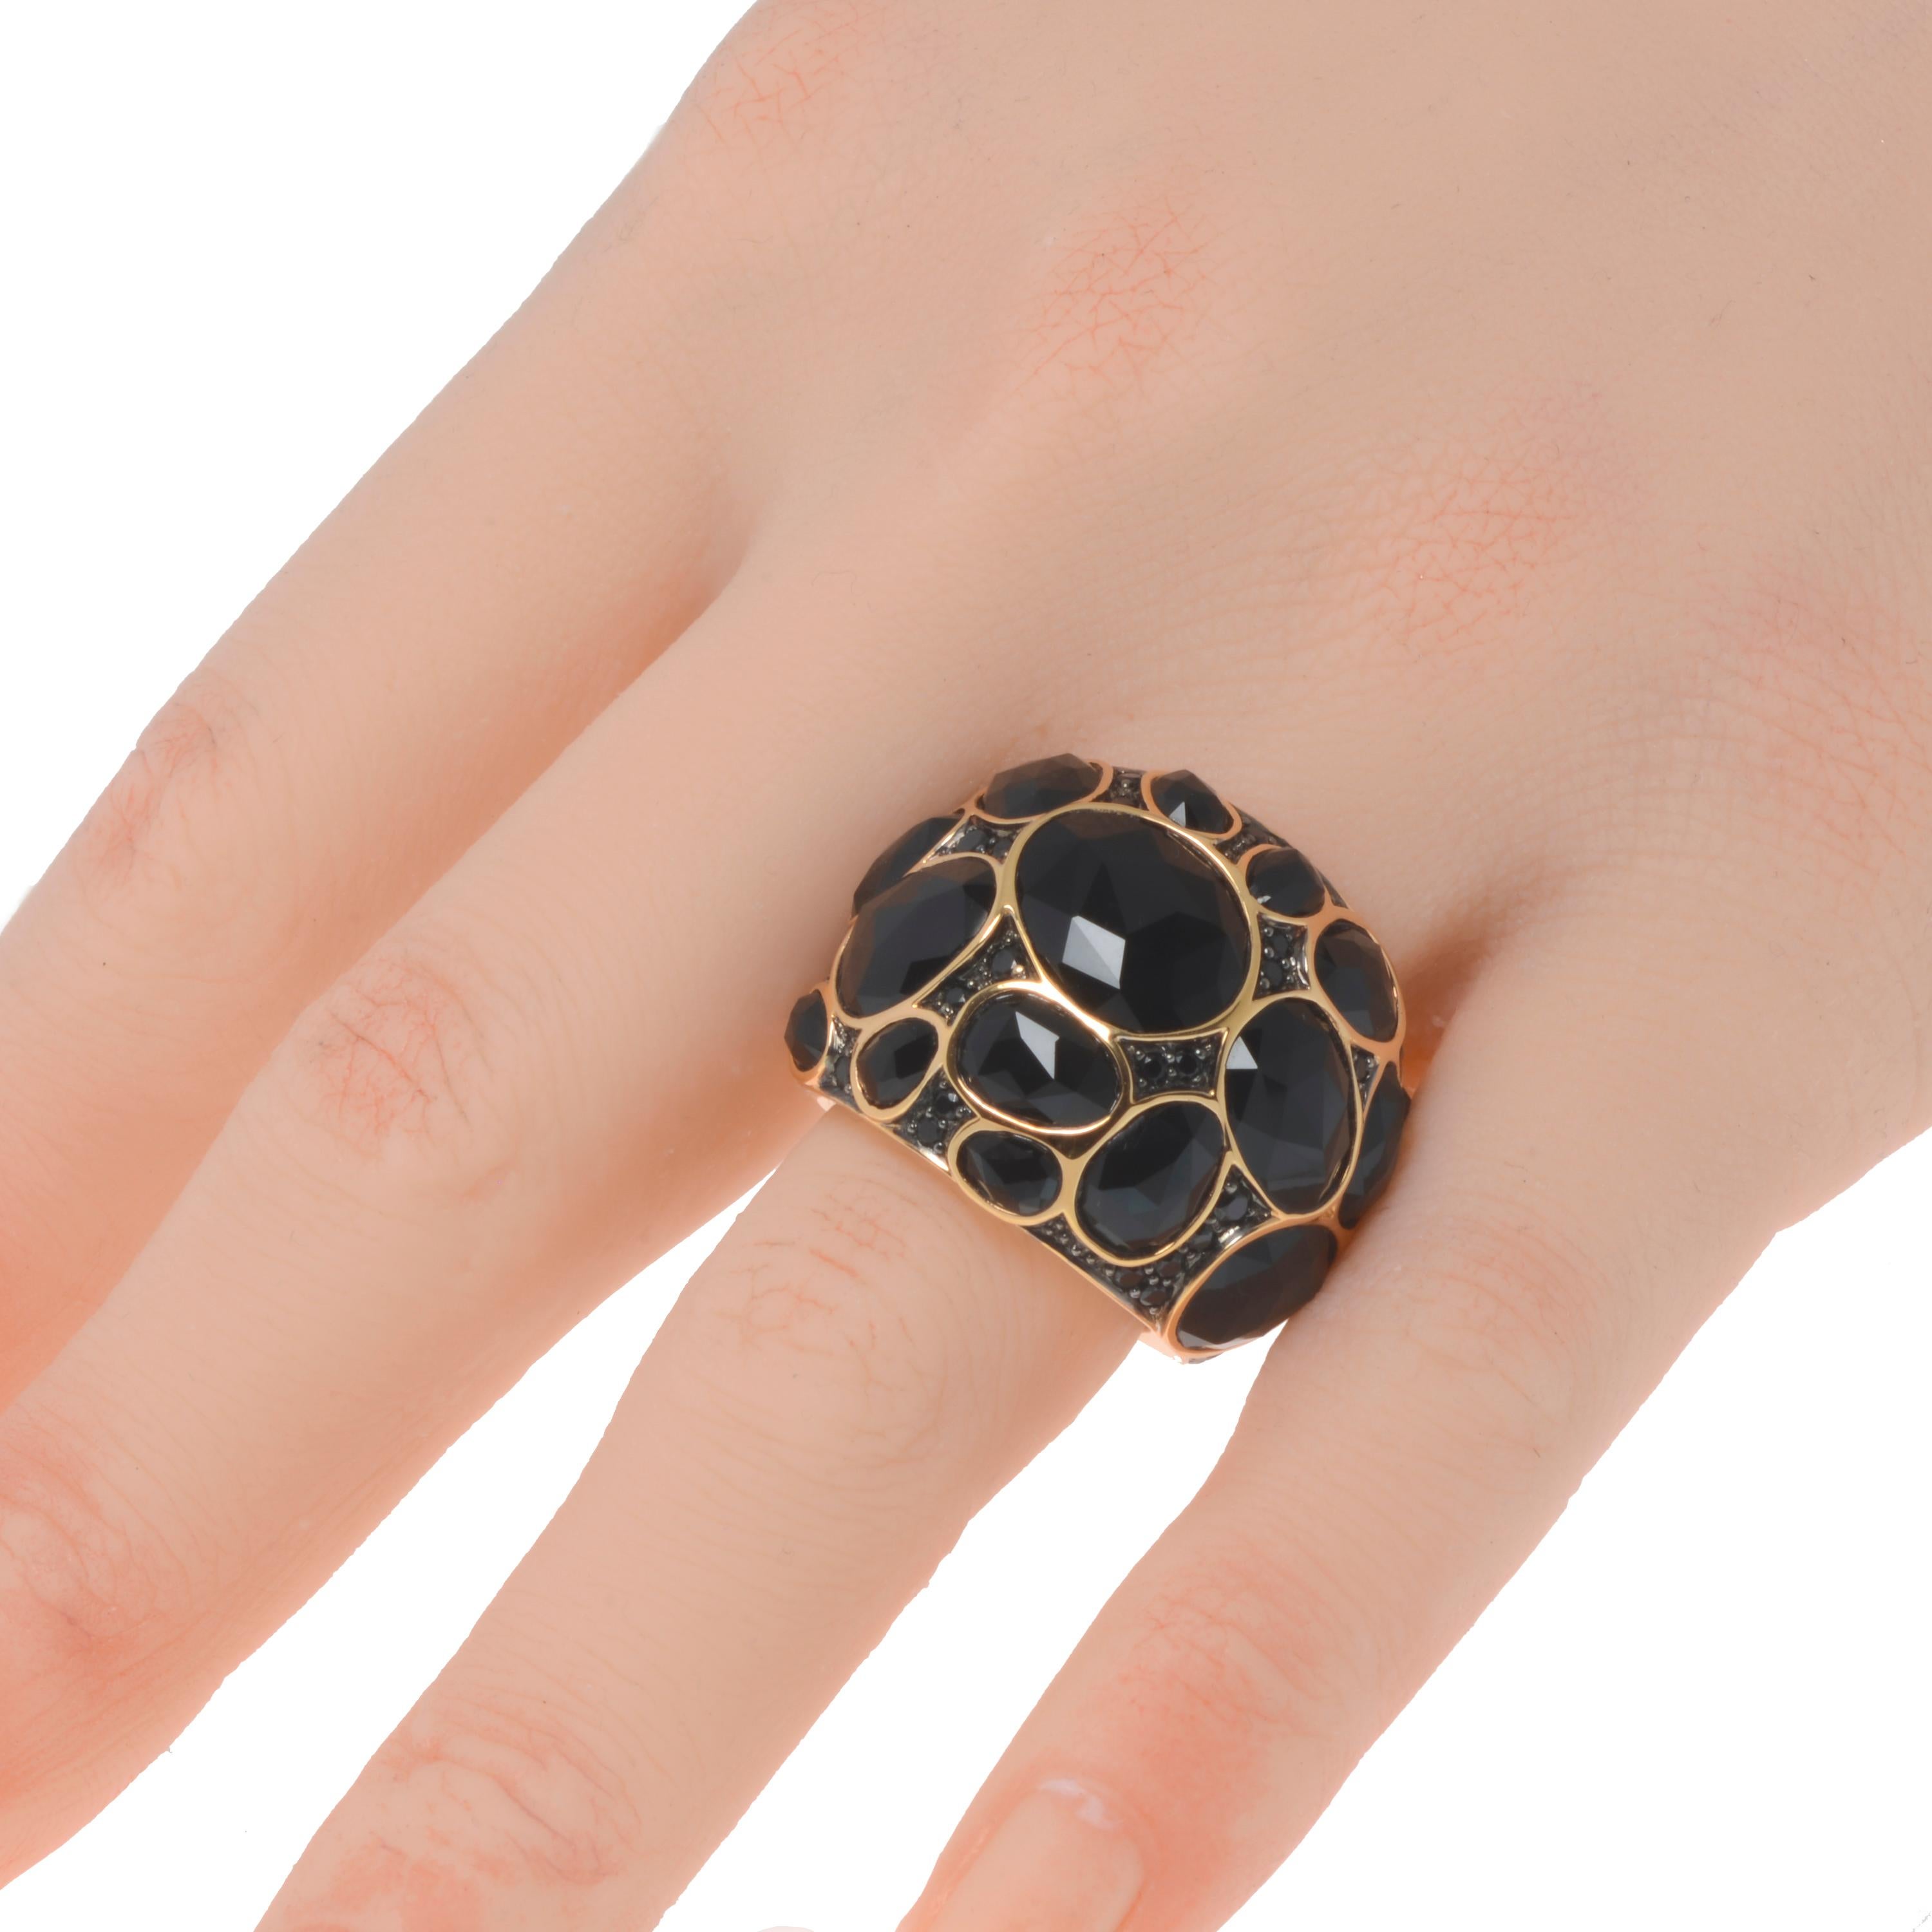 This dazzling Mimi Milano 18K Rose Gold cocktail Ring features an eye-catching mix of faceted agate and sparkling black spinel in wide domed band set in 18K rose gold. The ring size is 6.25. The Band Width is 22.7mm. The Weight is 23g. This designer